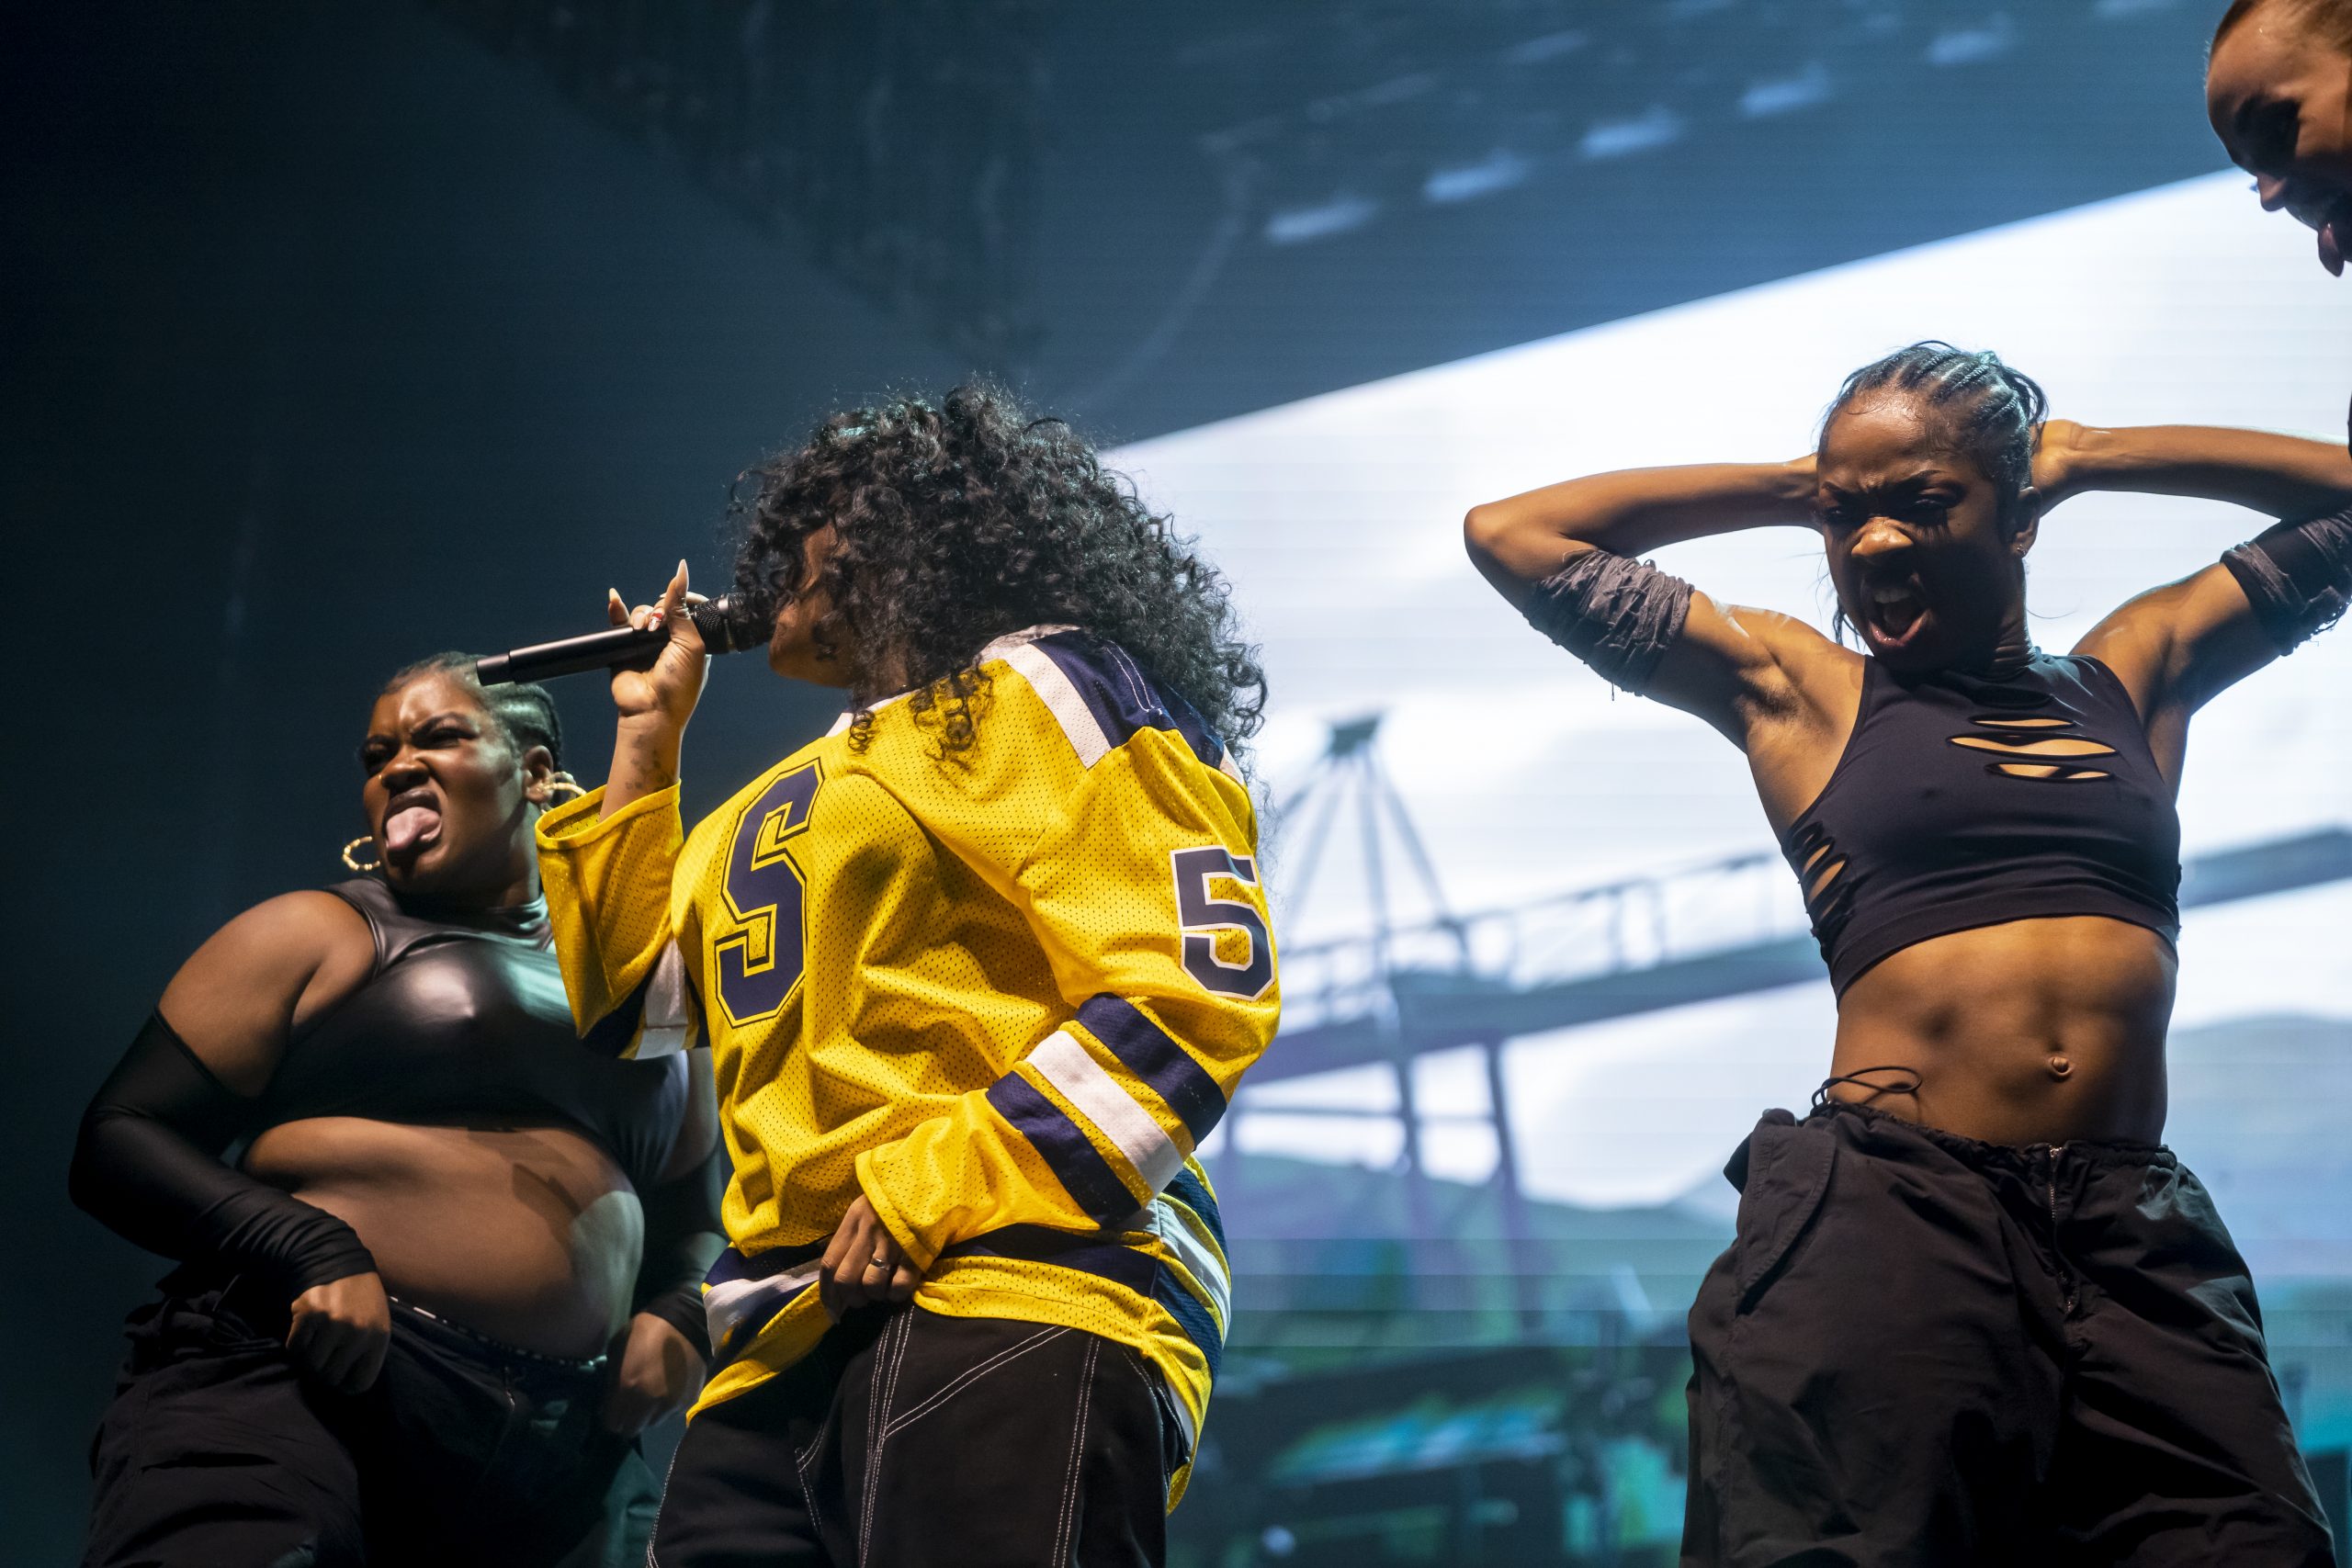 SZA sells out Capital One Arena with a magical concert - The Diamondback